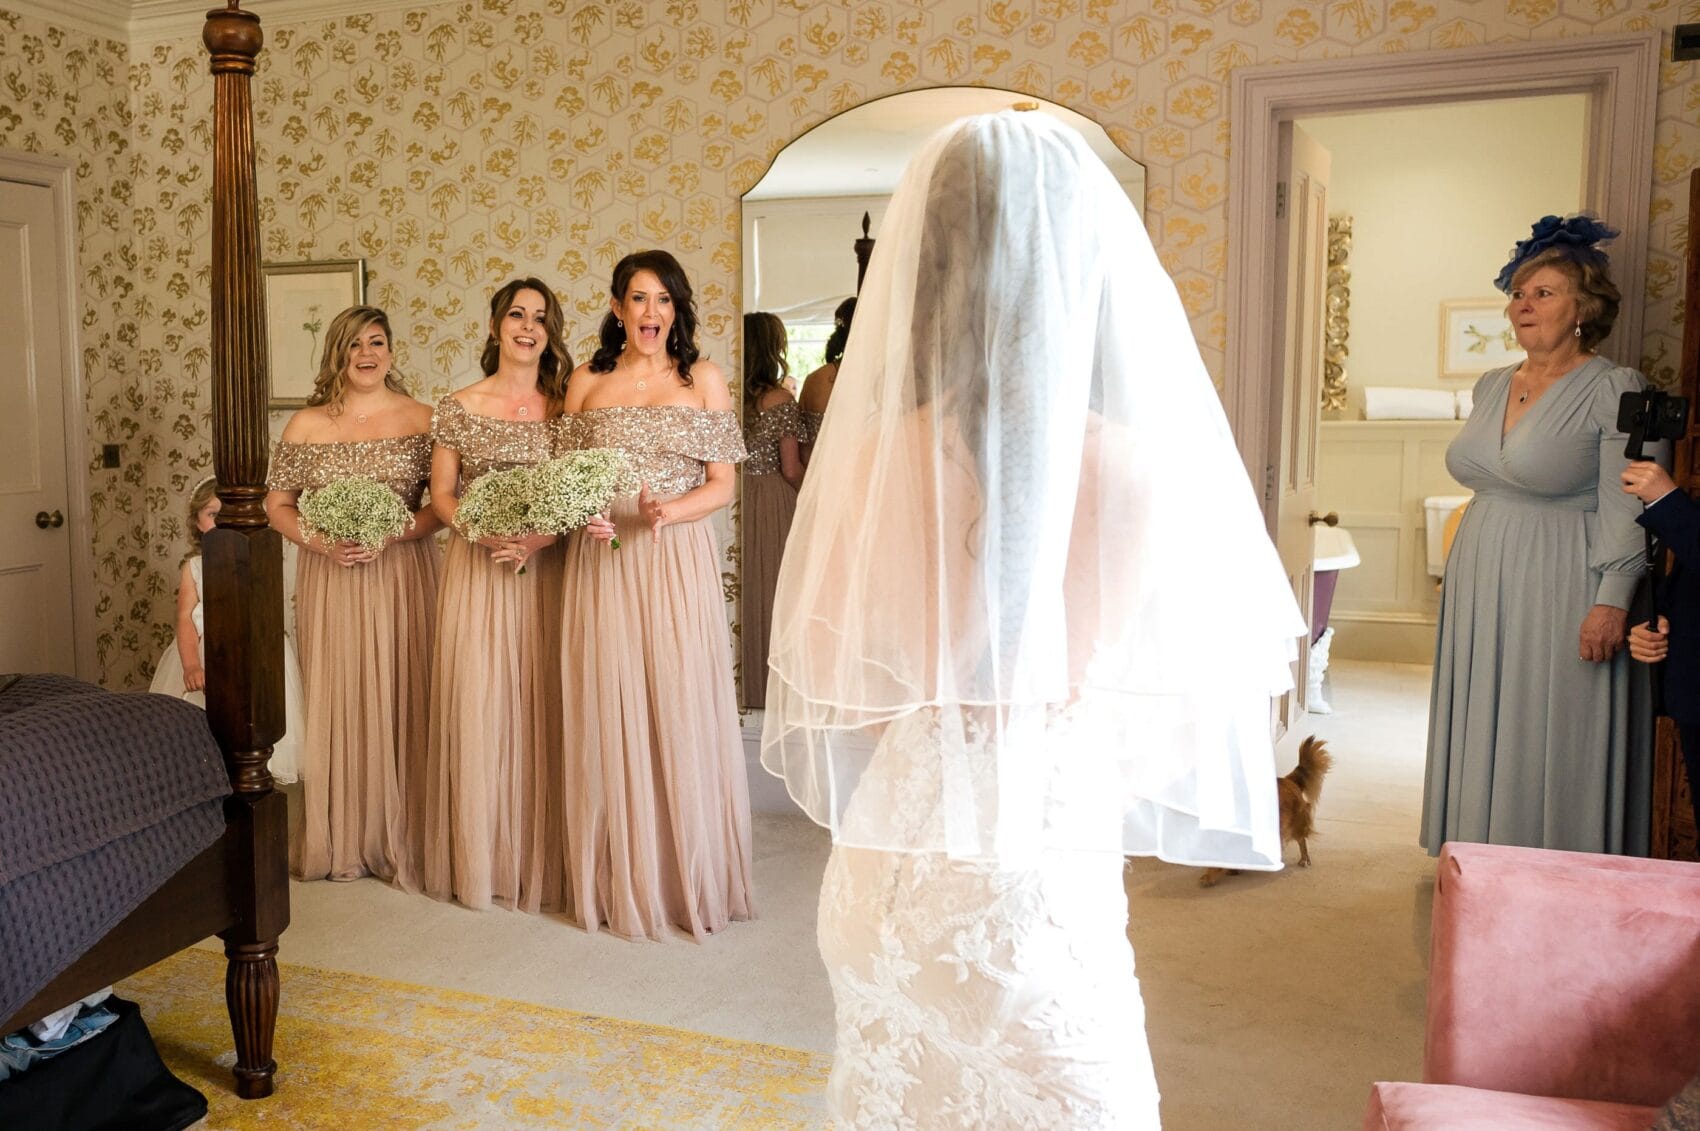 Bridesmaids see the dress on for the first time